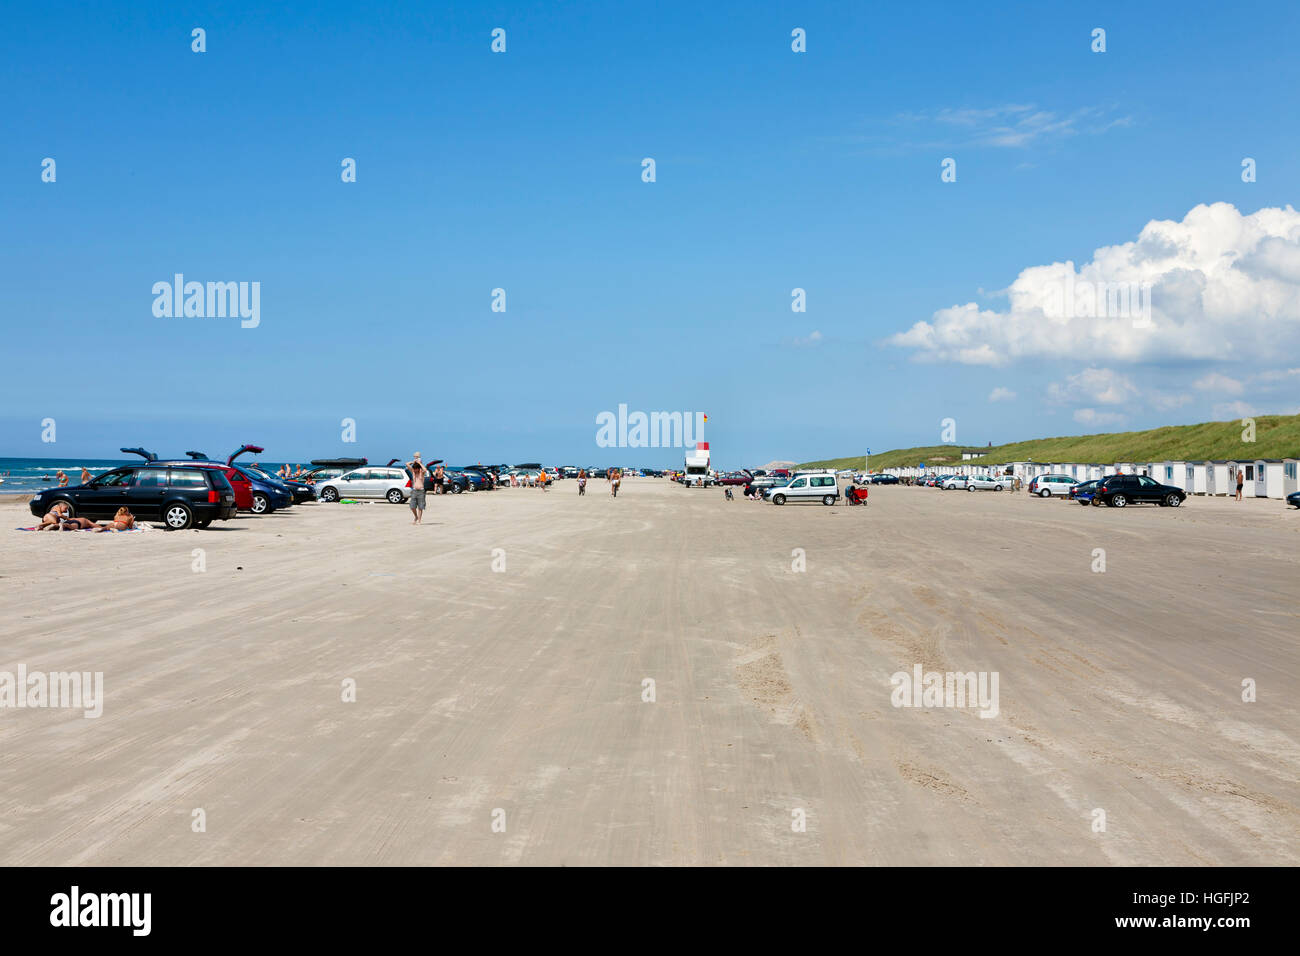 The famous beach at Blokhus in the north-western part of Jutland, Denmark. Cars and vehicles are allowed on this Danish beach Stock Photo